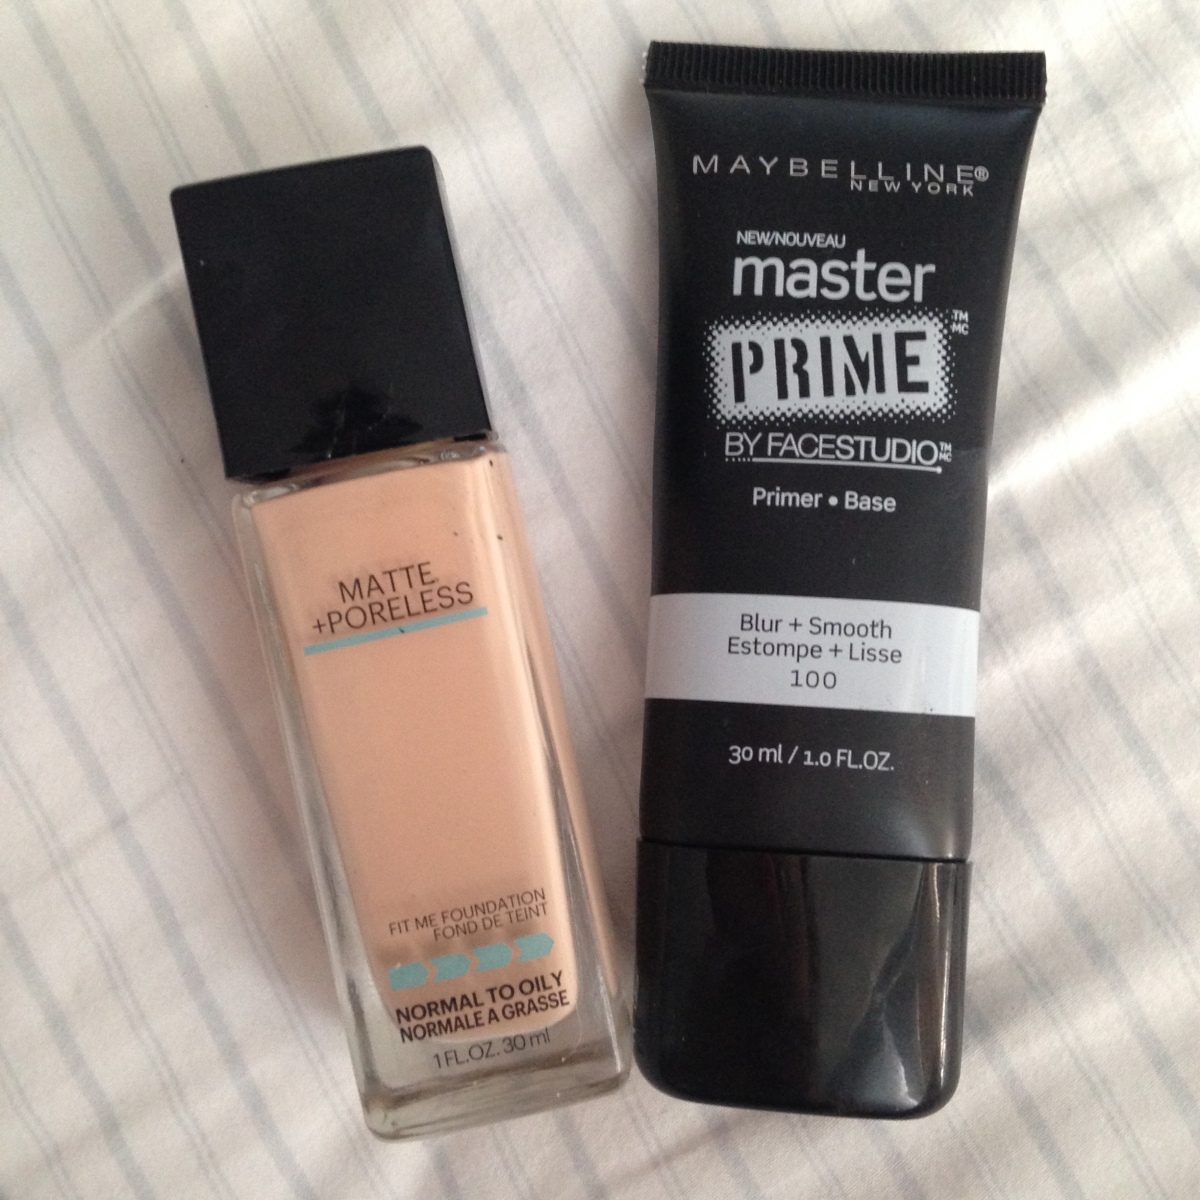 LIFESTYLE Fit & + FASHION ALL Face Matte Maybelline Foundation- Maybelline – Primer & THINGS MAKEUP, Poreless Me